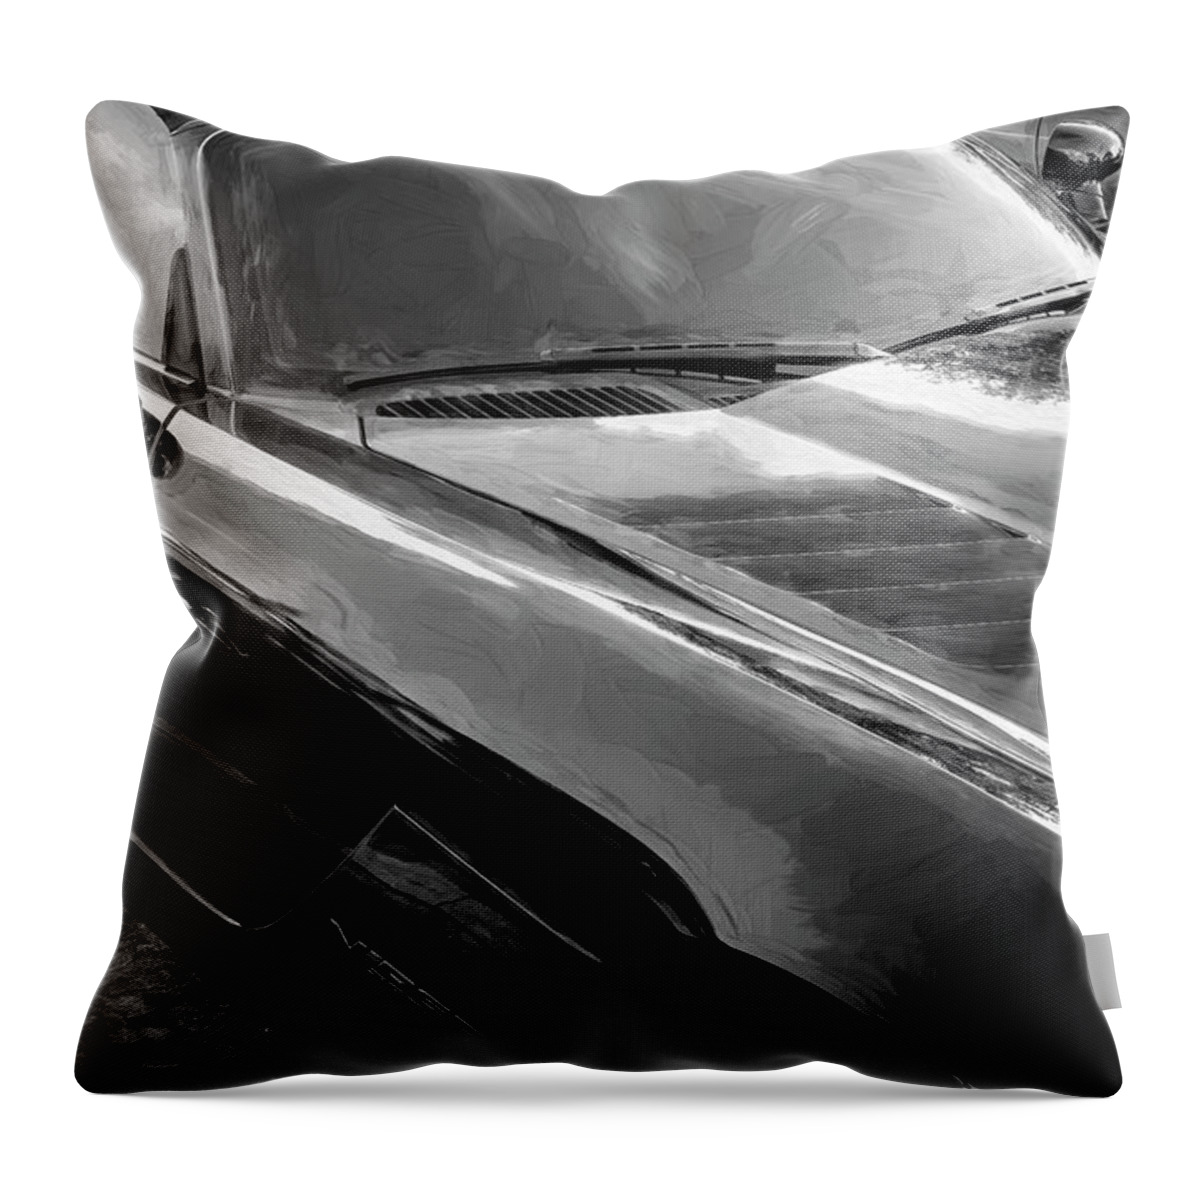 2005 Dodge Viper Gts Throw Pillow featuring the photograph 2005 Dodge Viper GTS X107 by Rich Franco